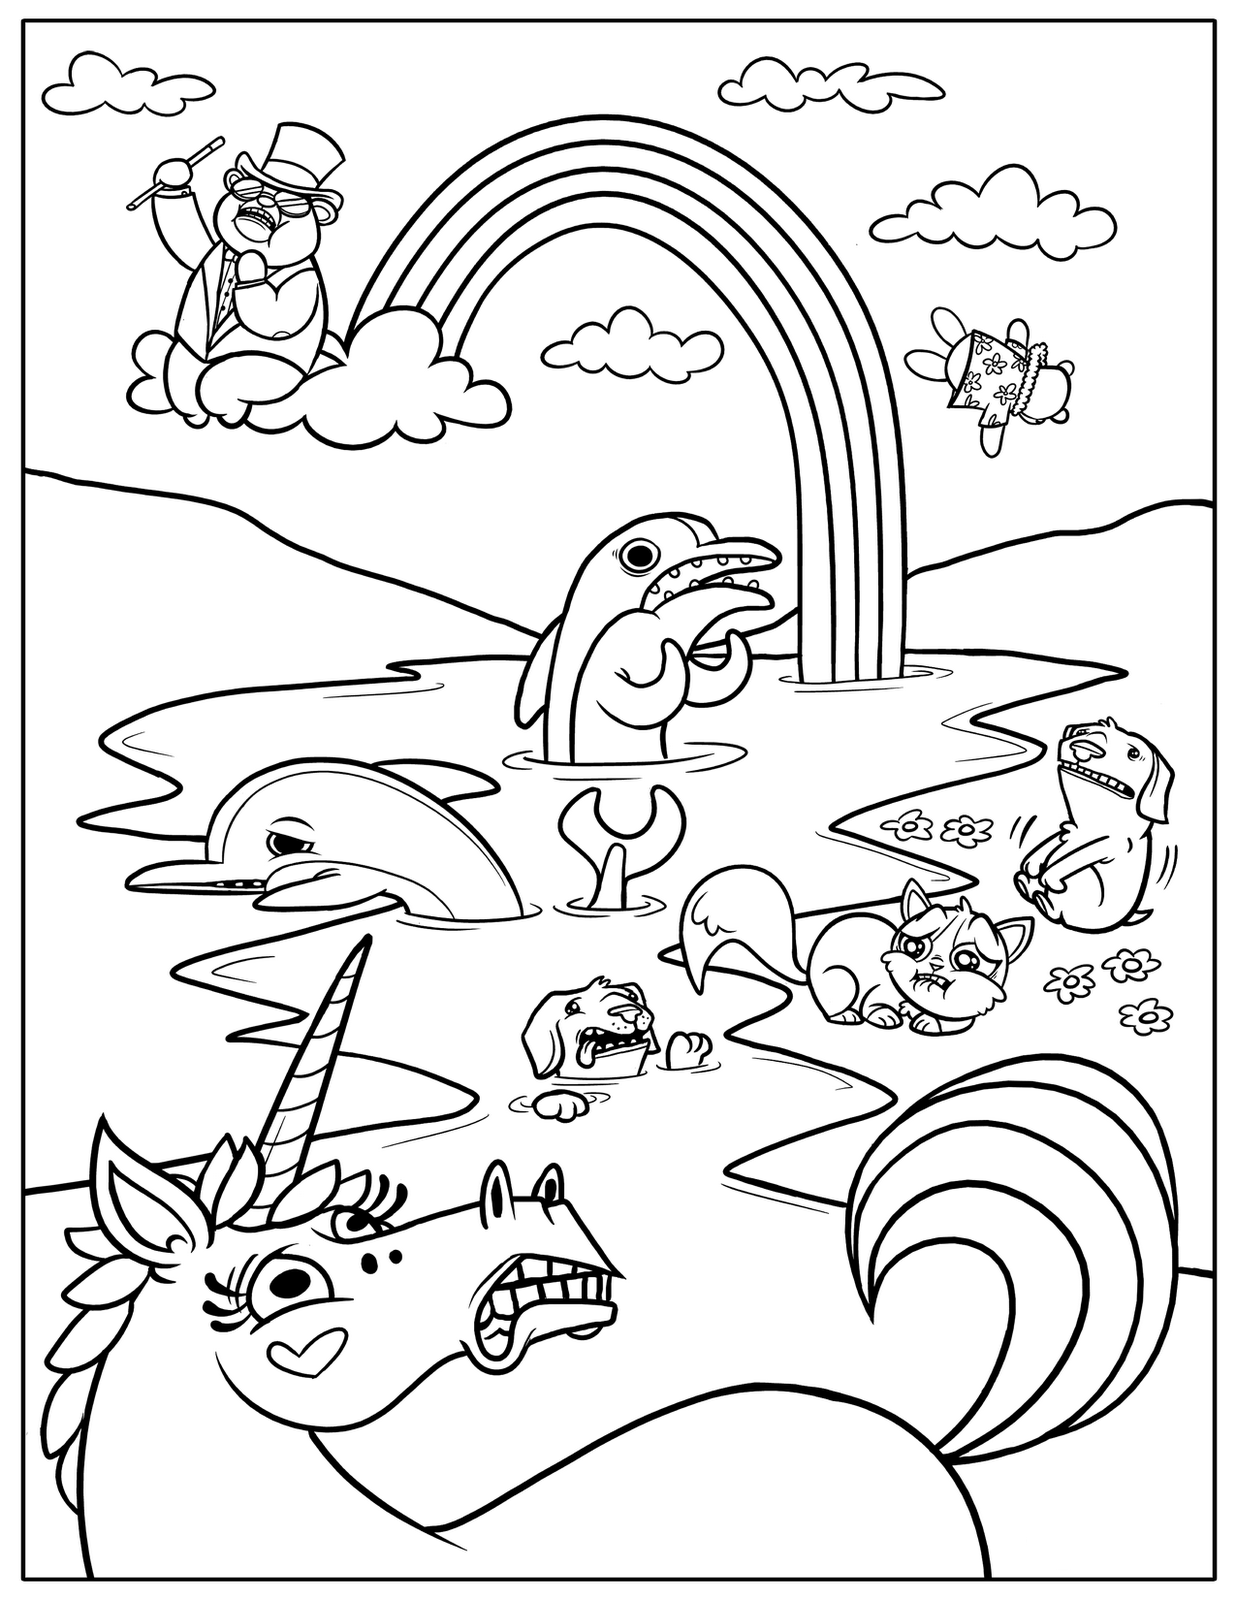 rainbow-friends-printable-coloring-sheets